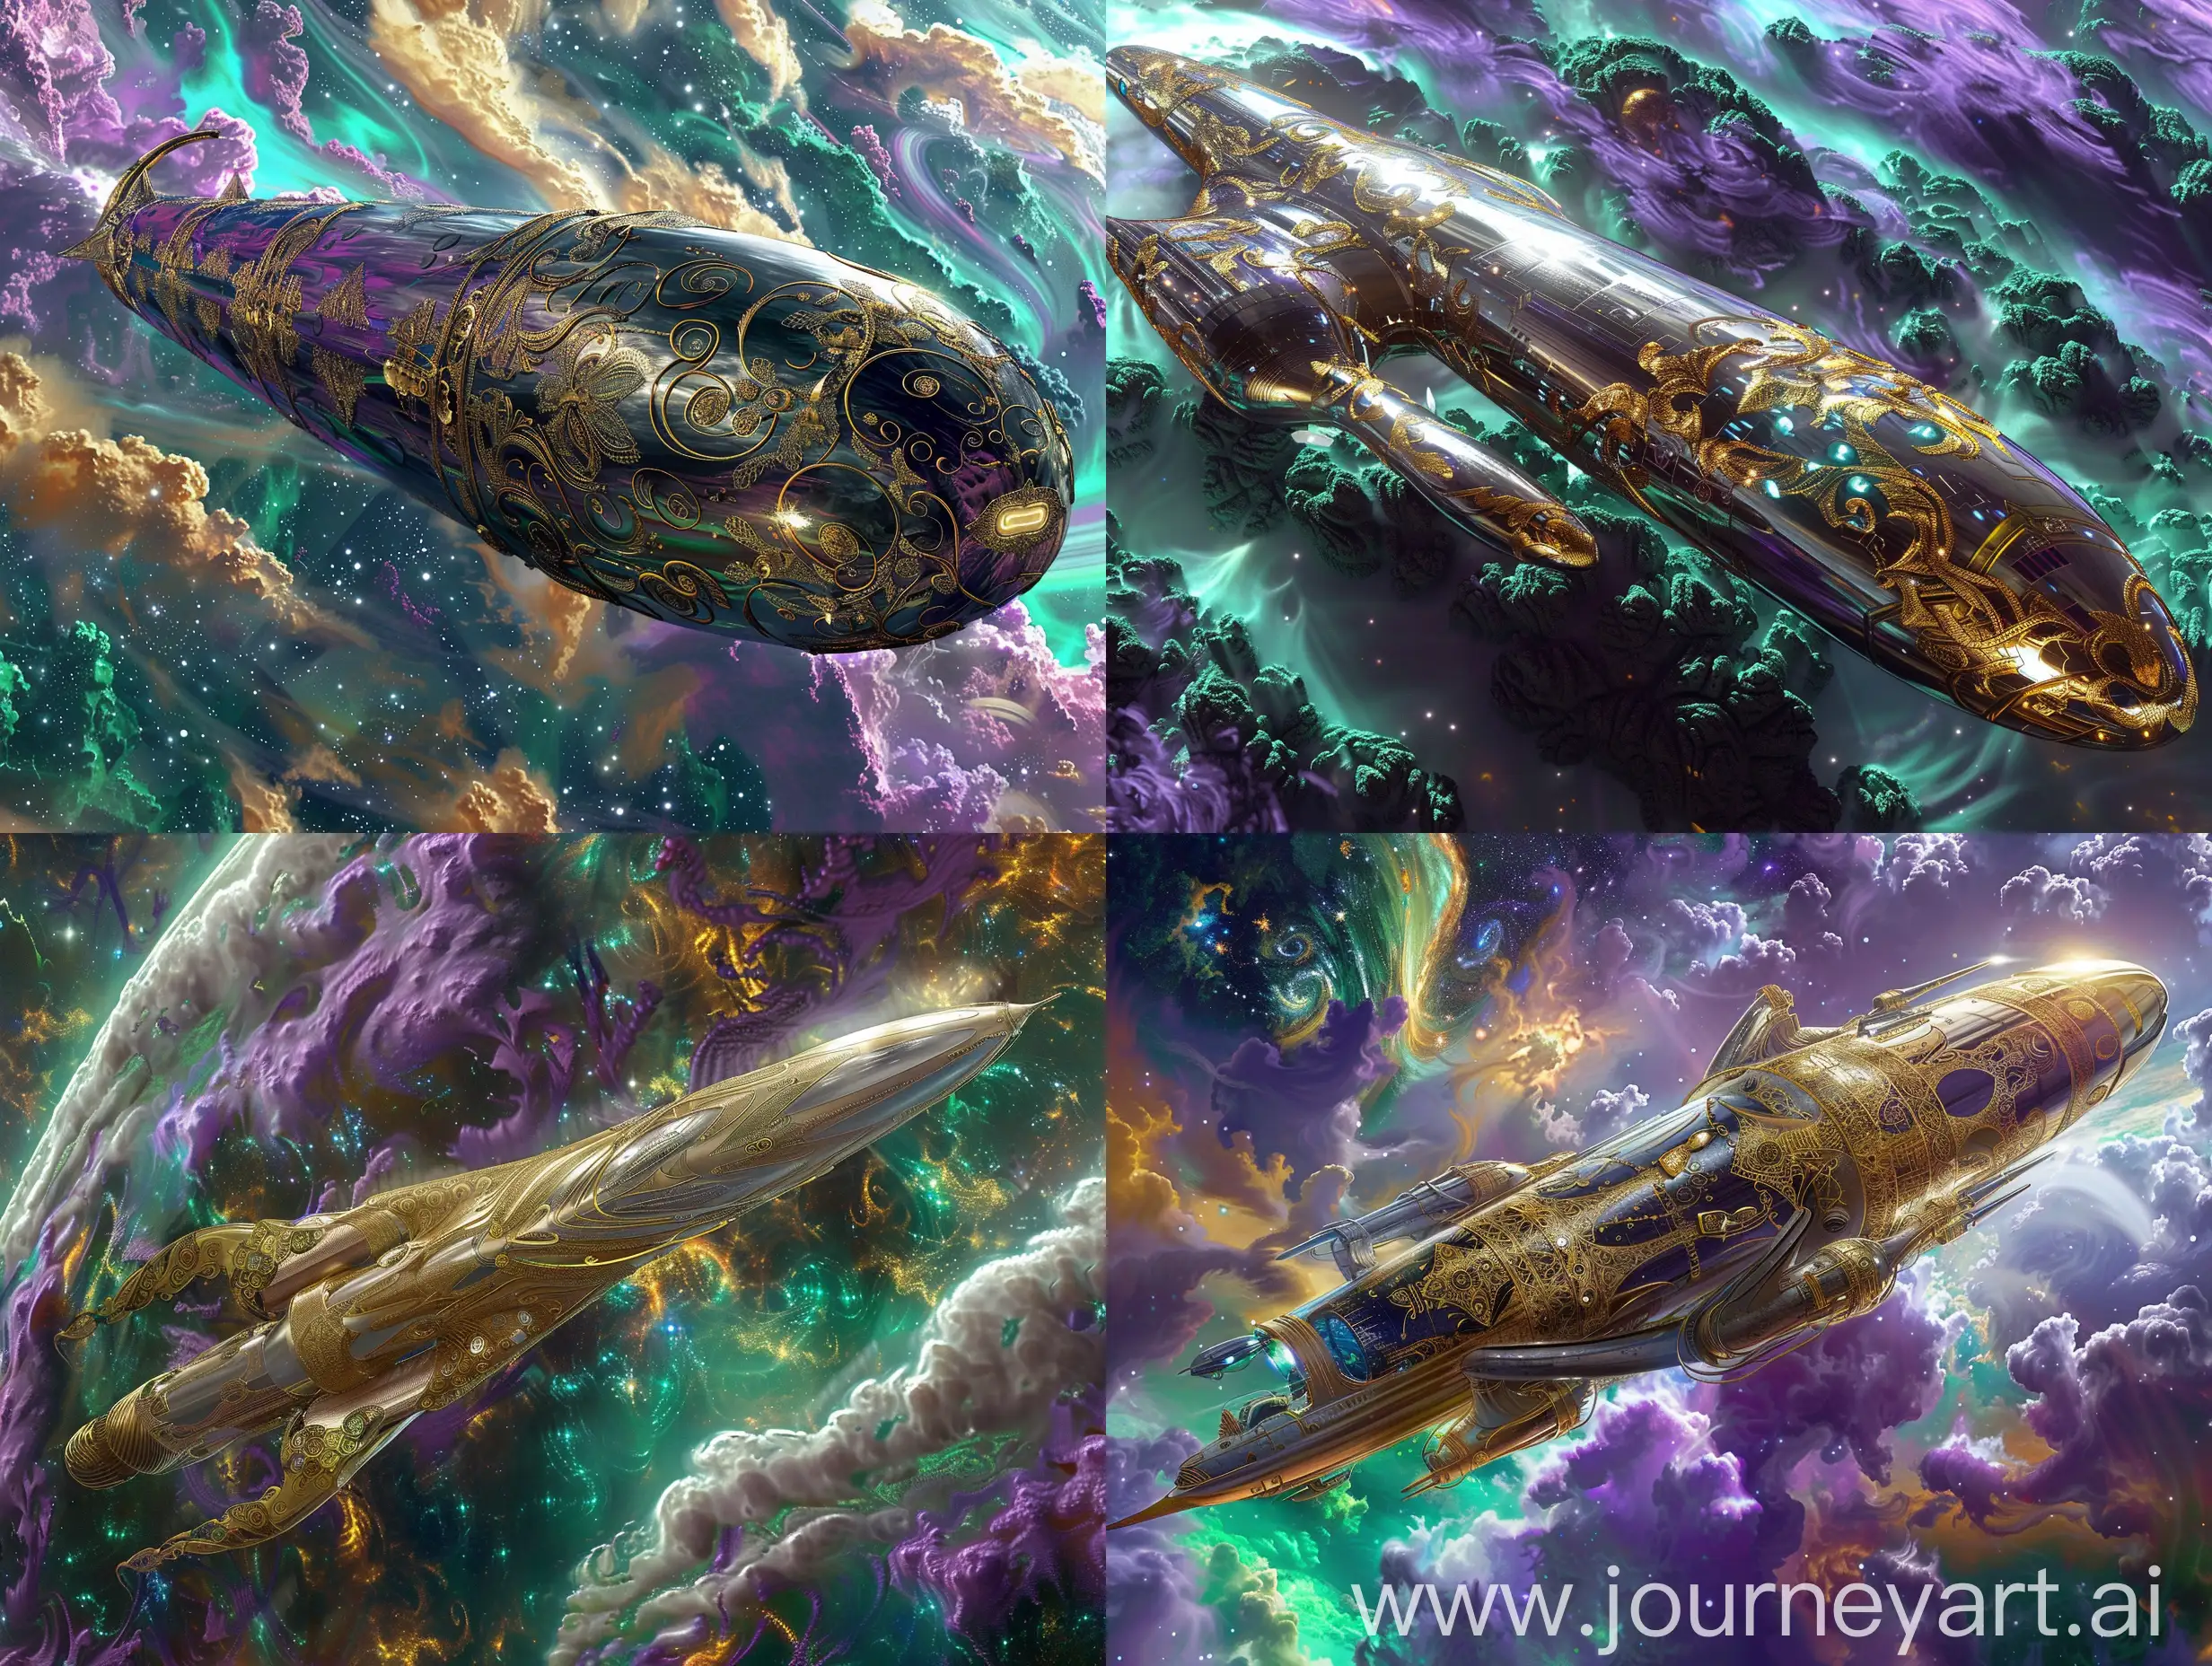 A sleek, futuristic spaceship adorned in intricate gold and silver filigree approaches an exotic planet. The metallic hull gleams in the starlight, reflecting the planet's vibrant colors. The planet itself is a lush paradise, with swirling purple and turquoise clouds swirling above emerald green forests and crystalline seas. This stunning image, perhaps a digital painting, is rendered with incredible detail and rich, immersive colors that transport viewers to this far-off world.